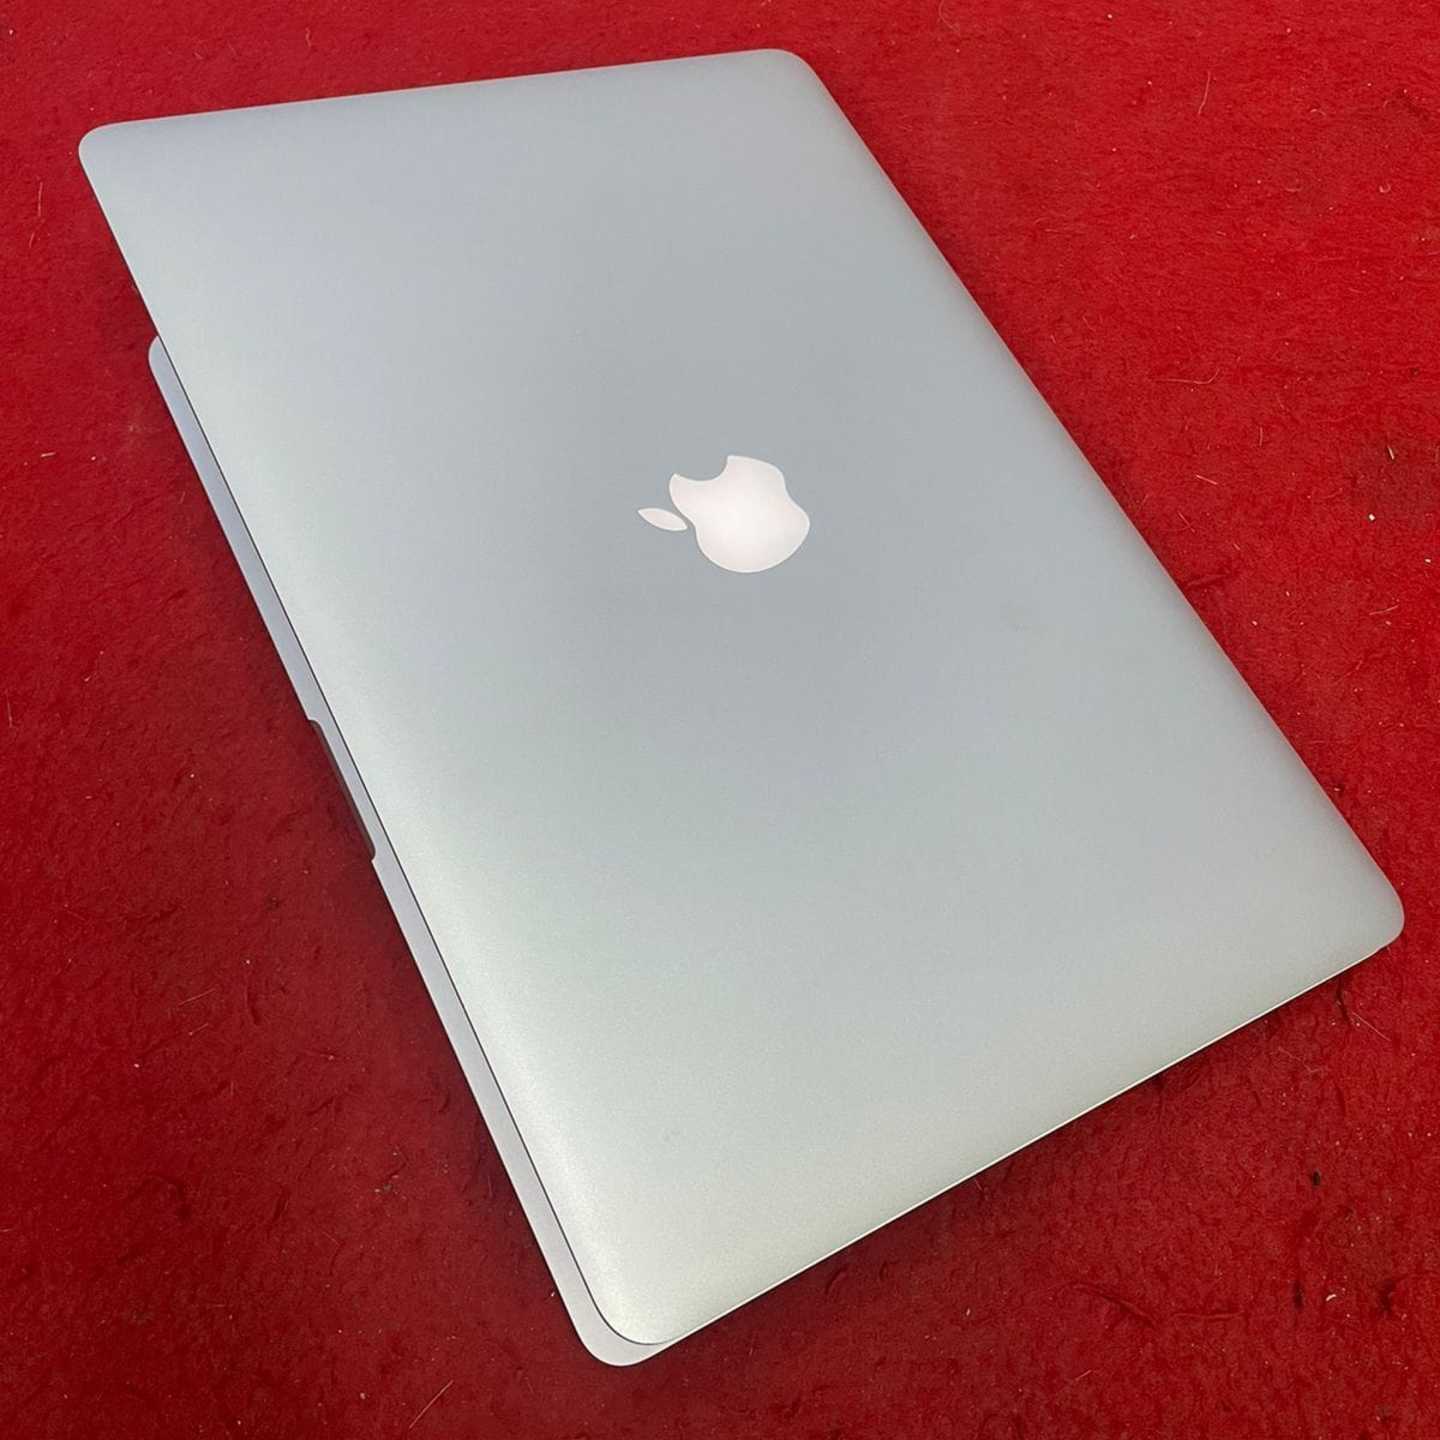 MacBook Pro 15 inch Retina   A1398 Model 2.2GHz intel Core i7 Processor  15.4” Retina Display 1.5GB Intel Iris Graphics 16GB 1600MHz DDR3 RAM 256GB PCIE Based SSD Model Year 2015 Excellent Battery Backup  Good condition  With adpter Quantity available 